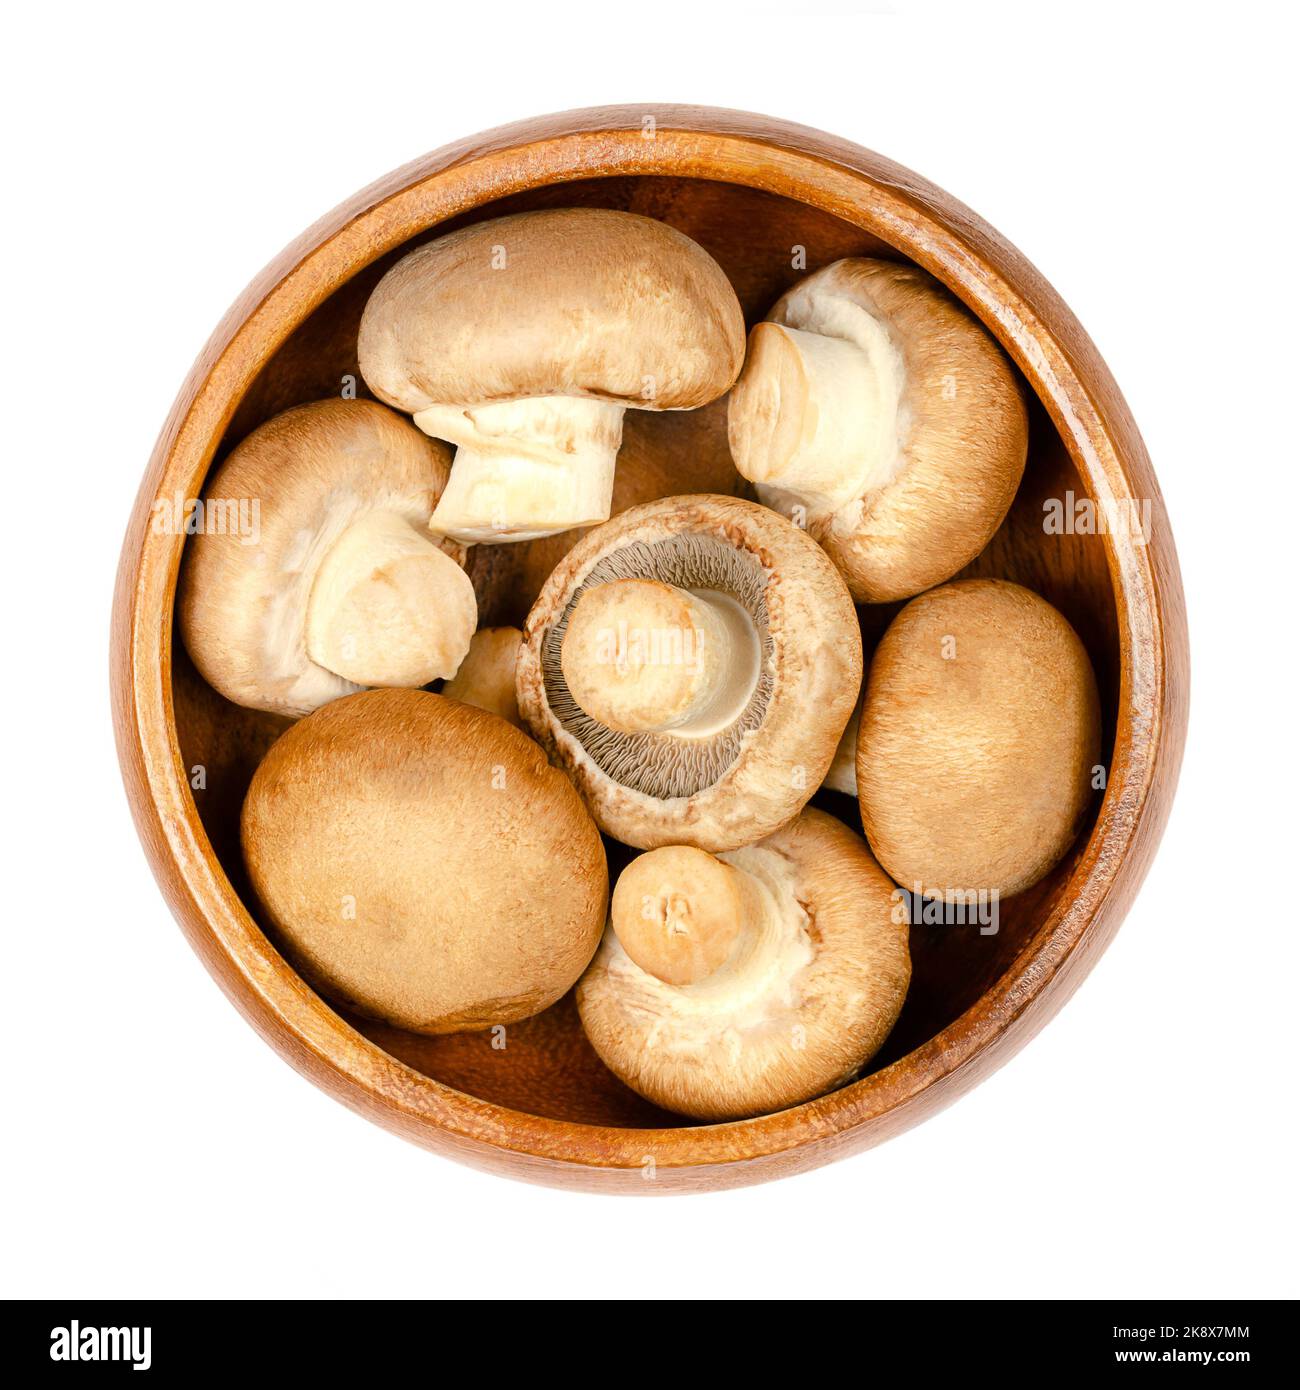 Brown champignons, in a wooden bowl, isolated, from above. Raw, young mushrooms, Agaricus bisporus, known as Swiss, Roman or Italian brown mushroom. Stock Photo